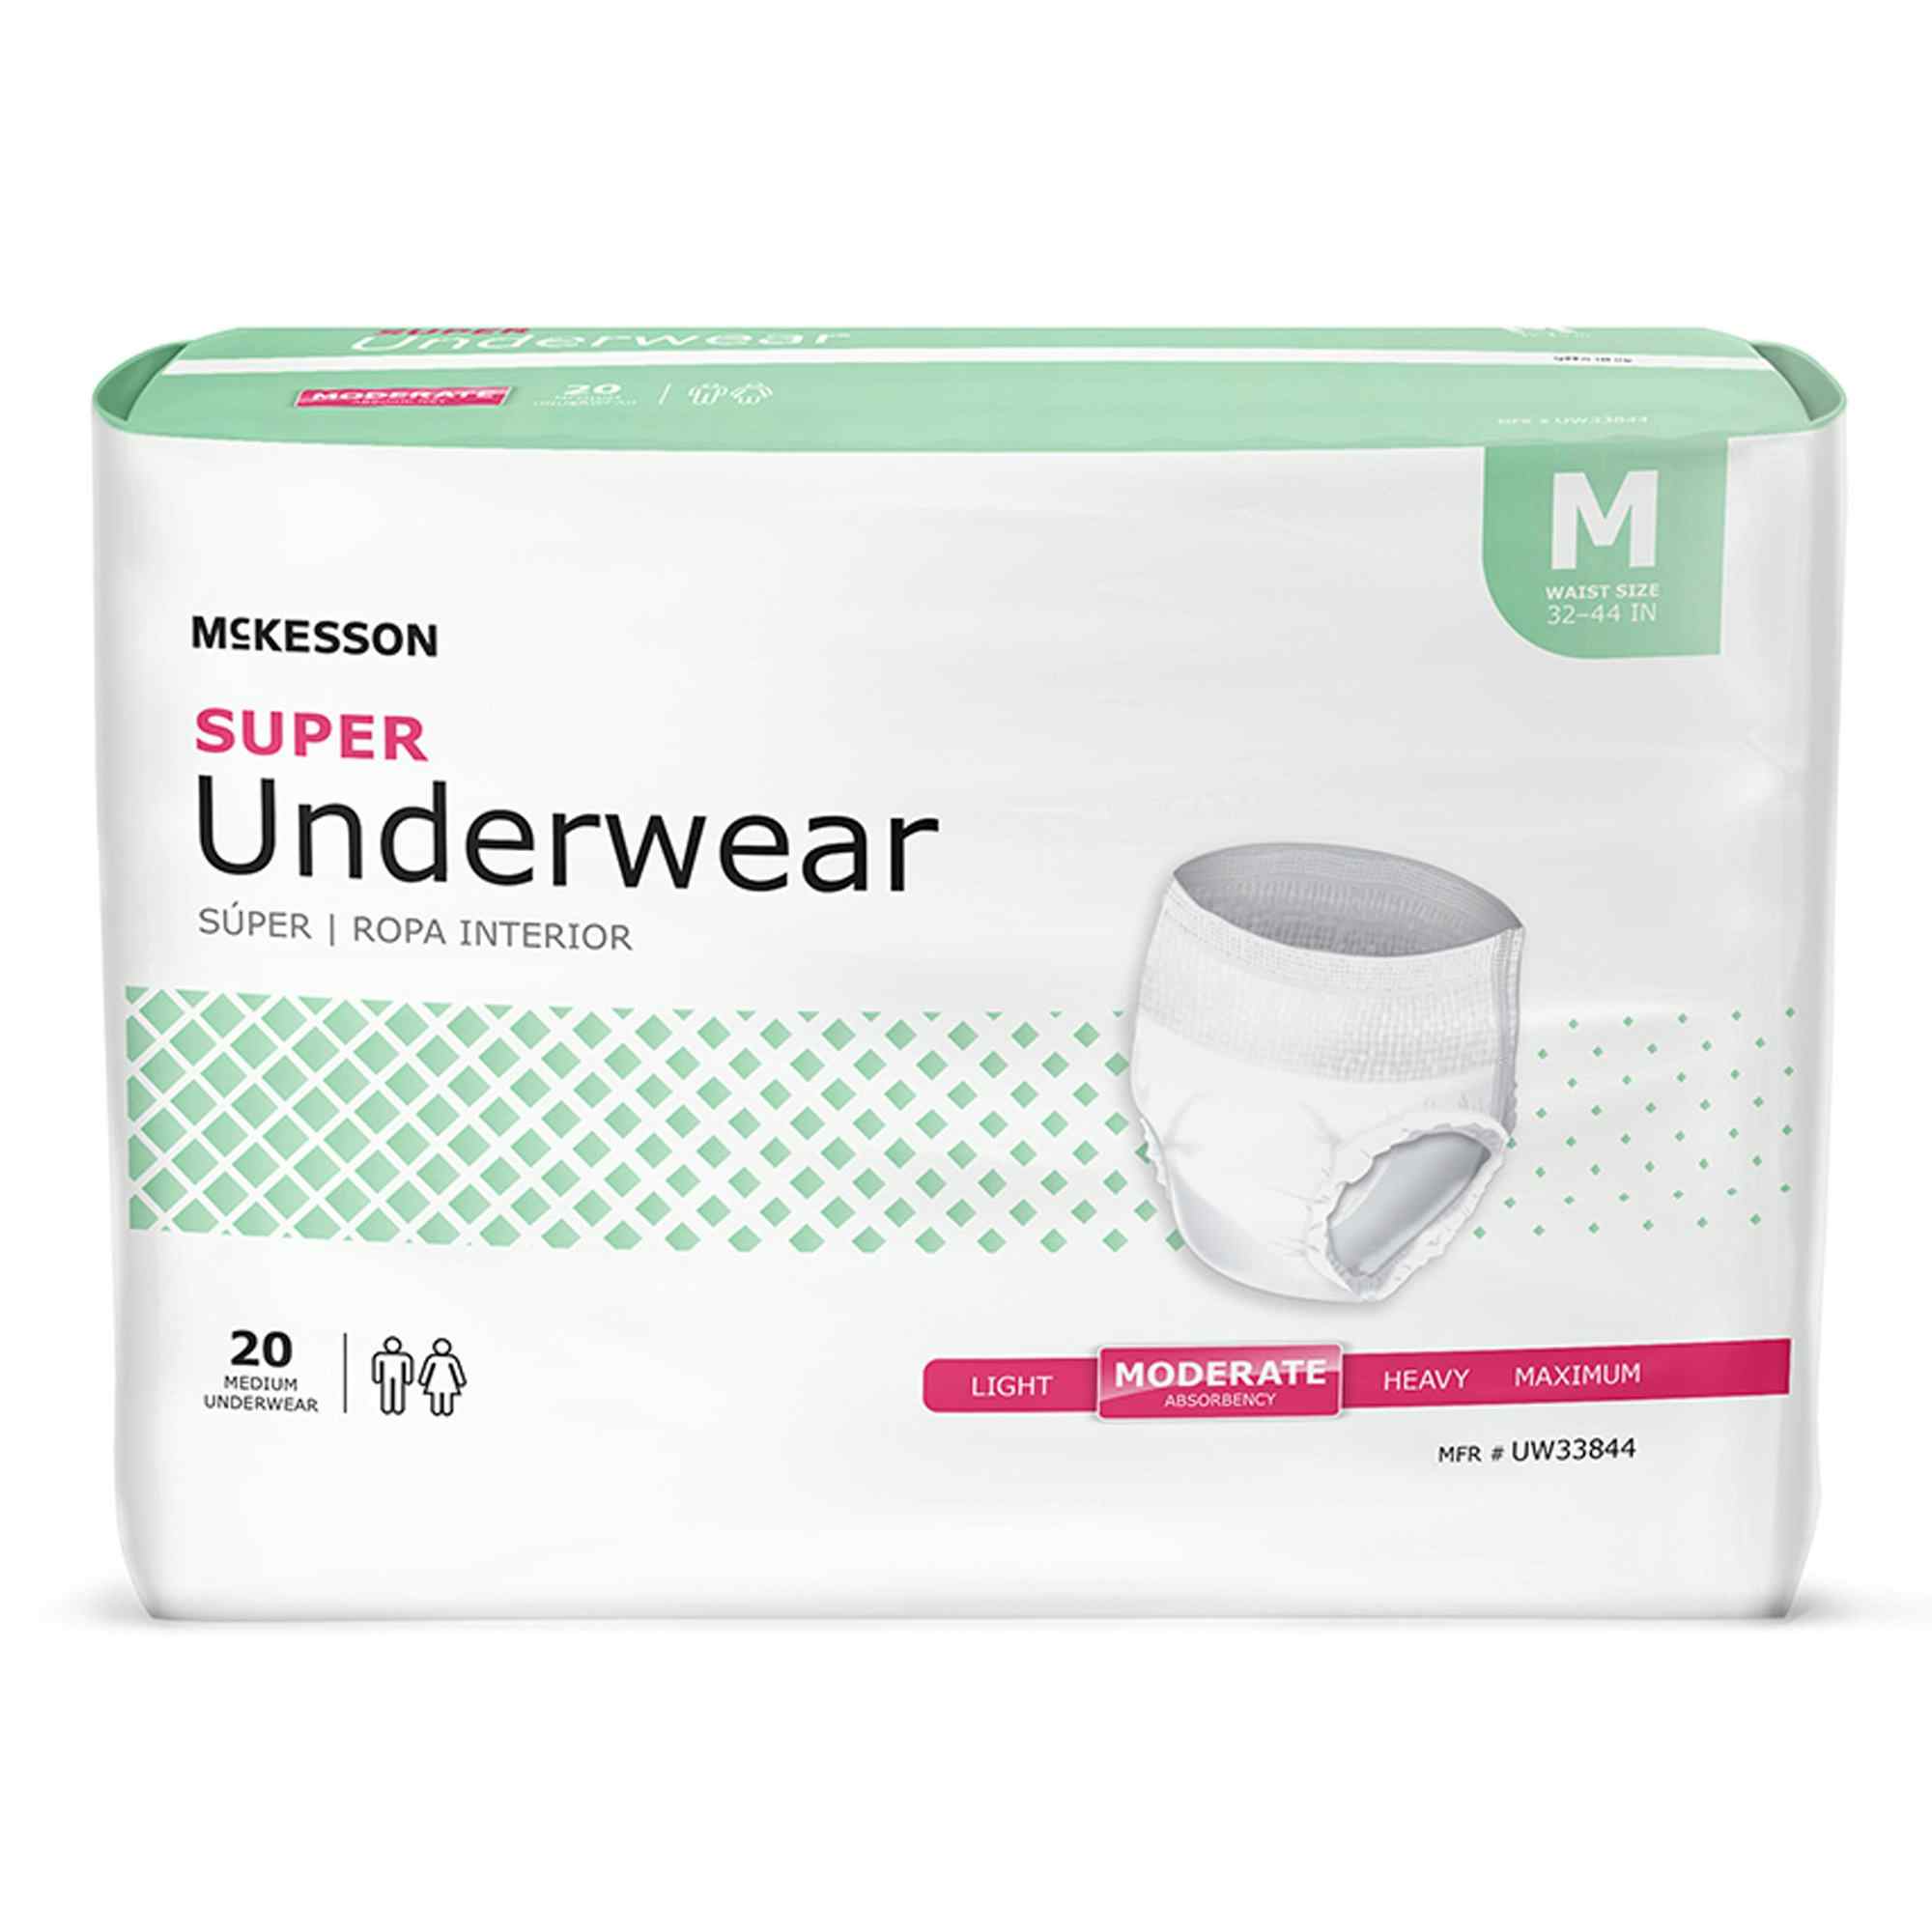 McKesson Unisex Adult Absorbent Pull-On, Moderate Absorbency, UW33844, Medium (32-44") - Case of 80